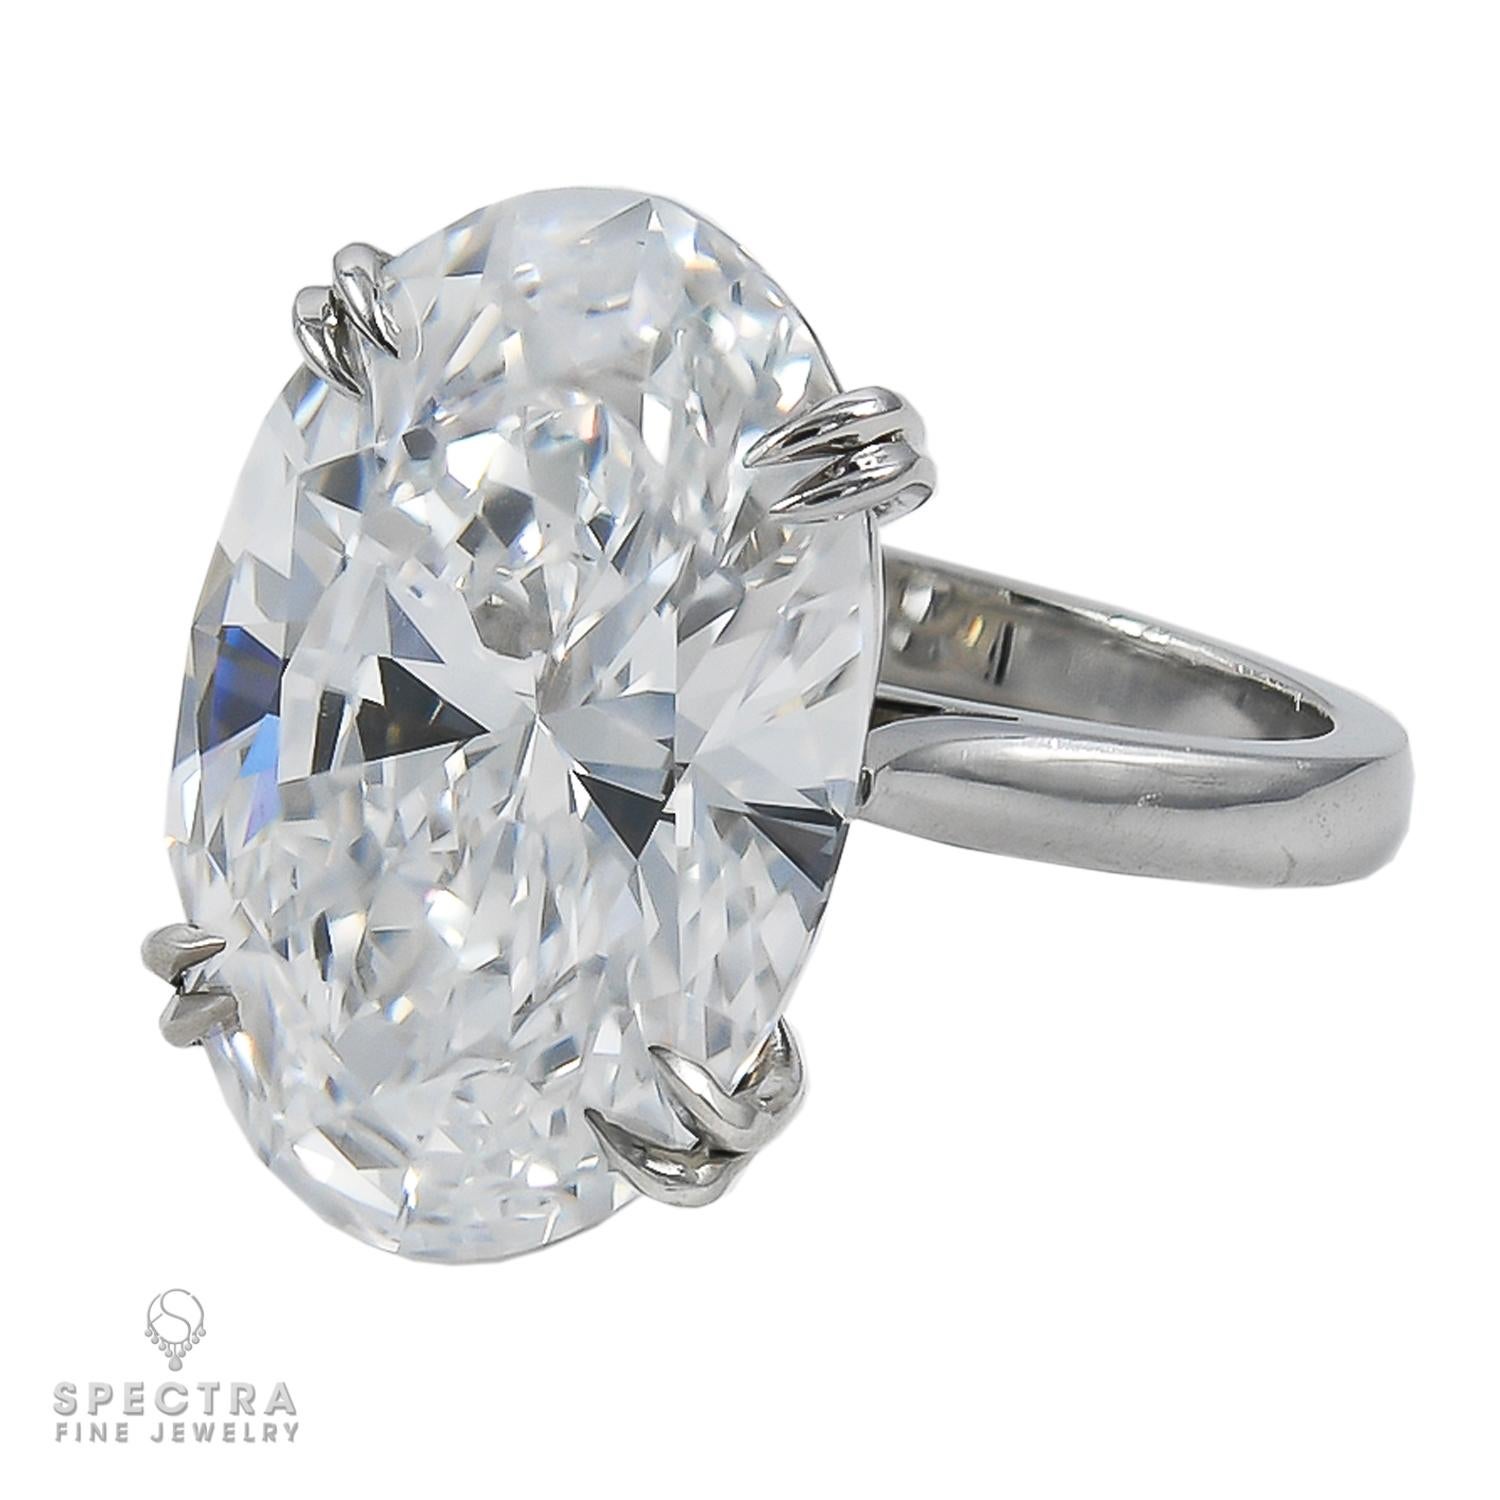 Indulge in the timeless elegance of this exquisite engagement ring crafted by Spectra Fine Jewelry. A captivating centerpiece adorns this piece—a magnificent oval-shaped diamond boasting remarkable specifications: D color, VVS1 clarity, and an